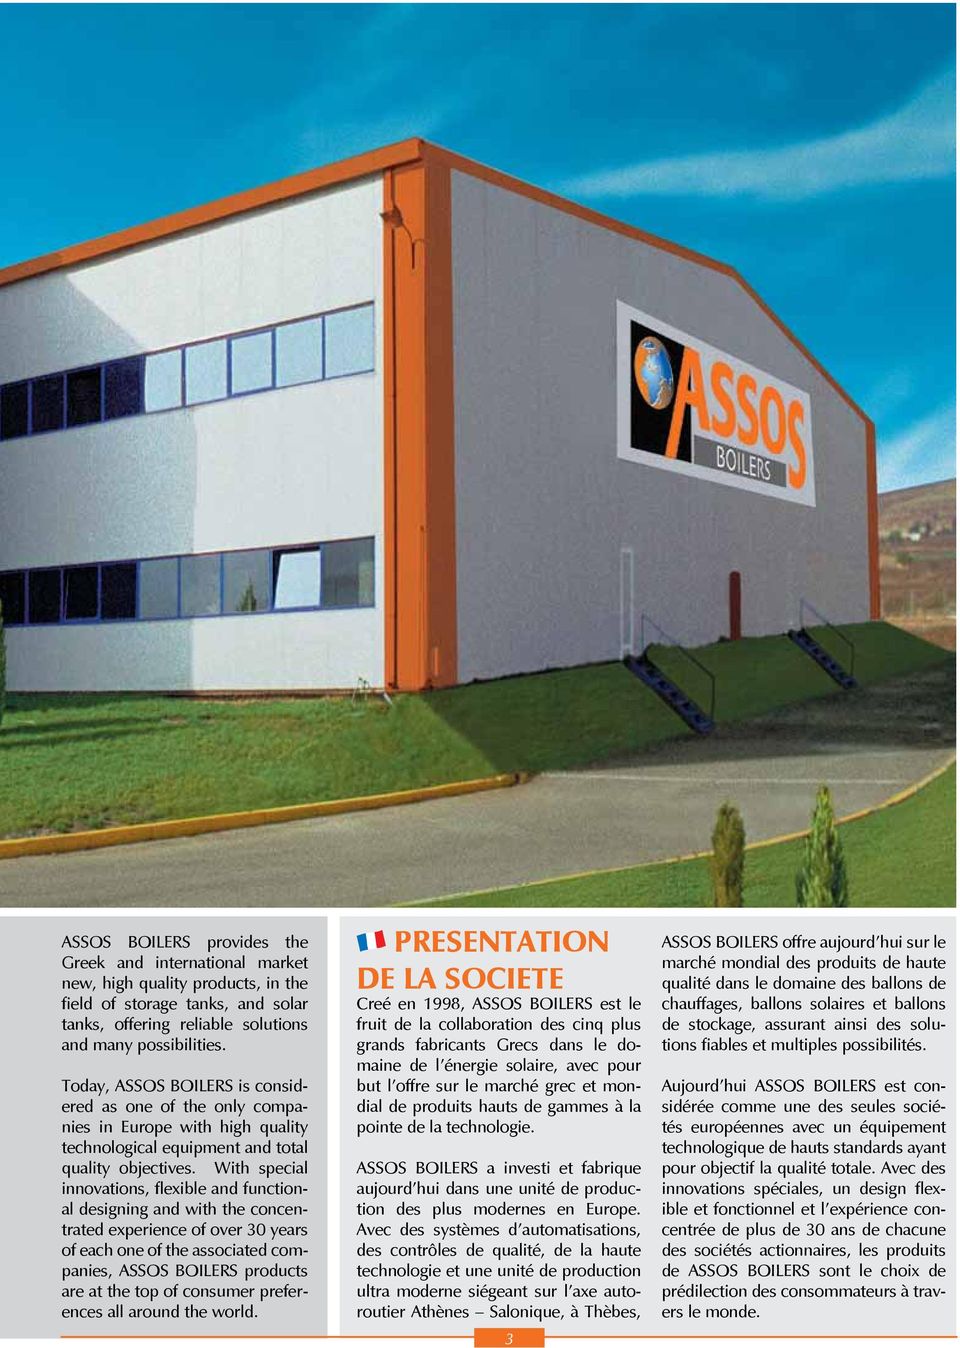 With special innovations, flexible and functional designing and with the concentrated experience of over 30 years of each one of the associated companies, ASSOS BOILERS products are at the top of